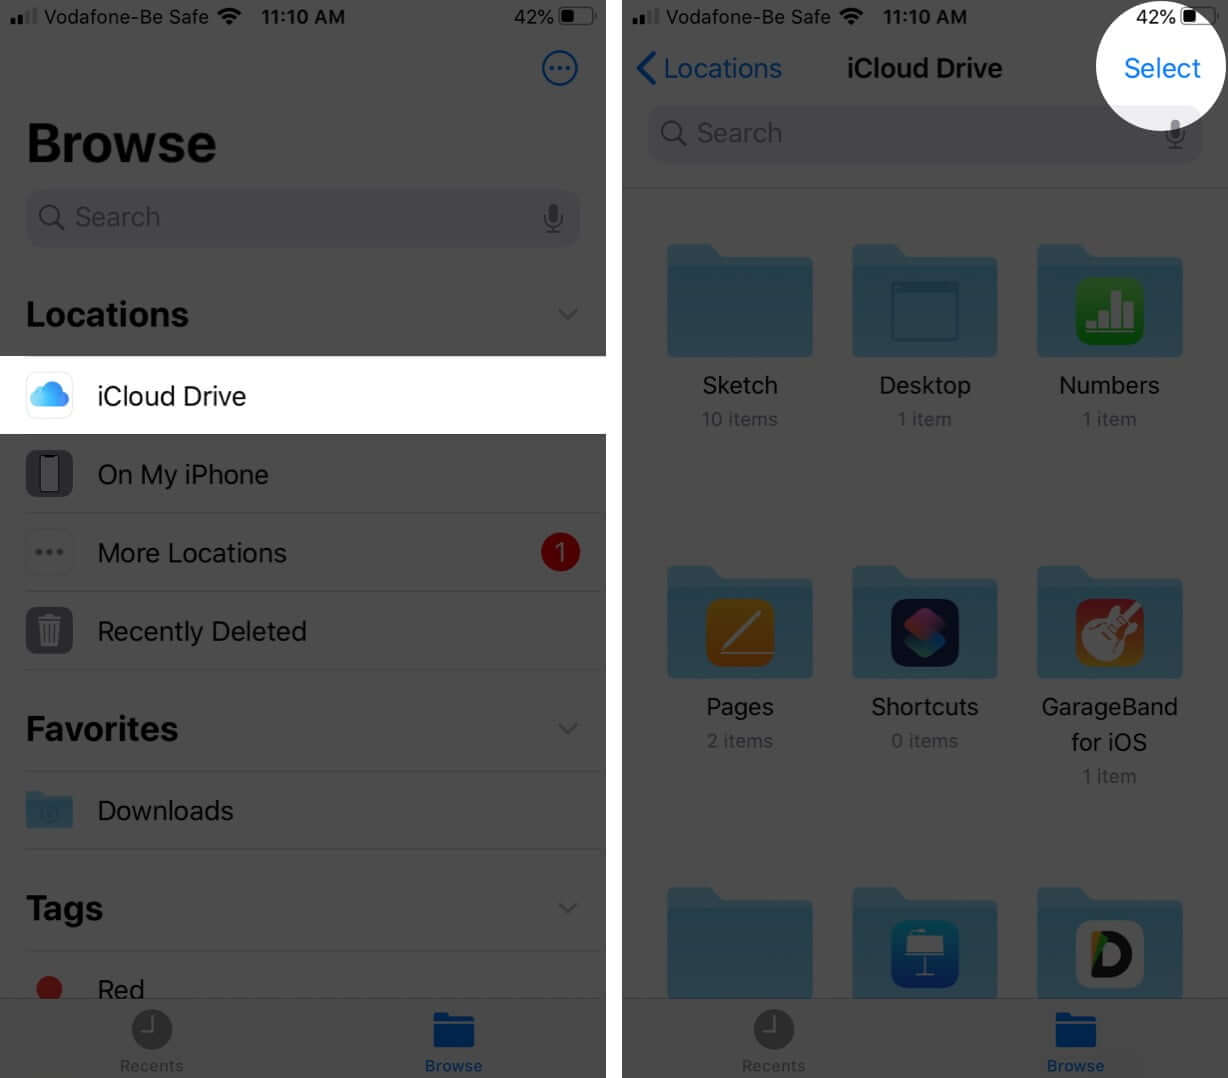 Tap on iCloud Drive and Then Tap on Select